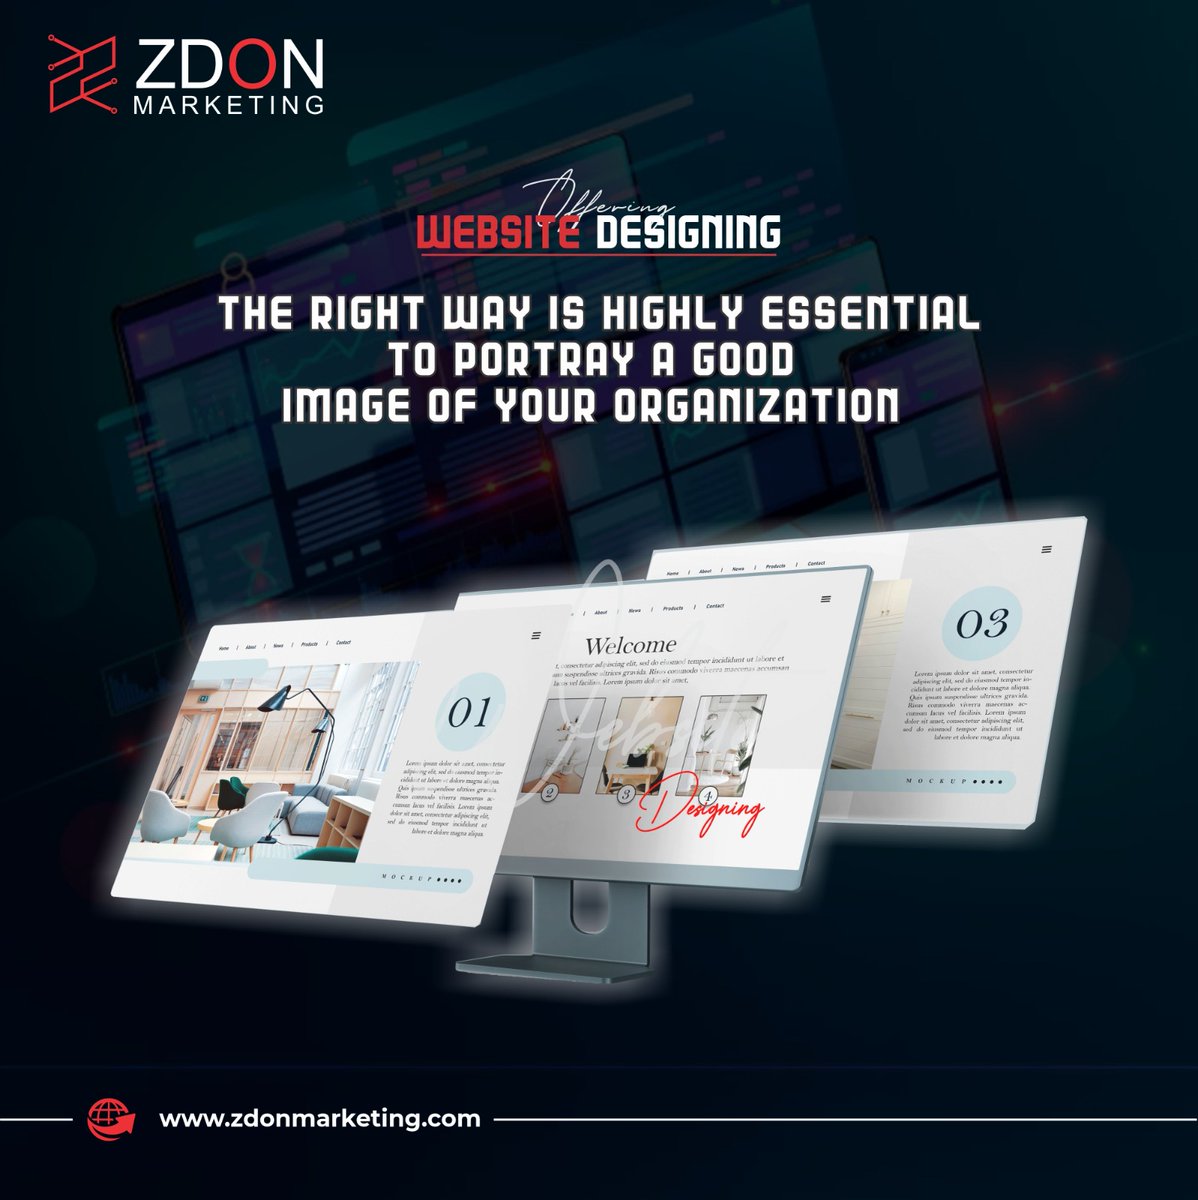 Transform Ideas into Stunning Reality with Our Website Designing Services.

For more details feel free to call us at:
0331-0003393 

#digitalmarketing #zdonmarketing #digitilization #webdevelopment #graphicdesigning #digitalmarketingservices #BahriaTown #zdonmarketing